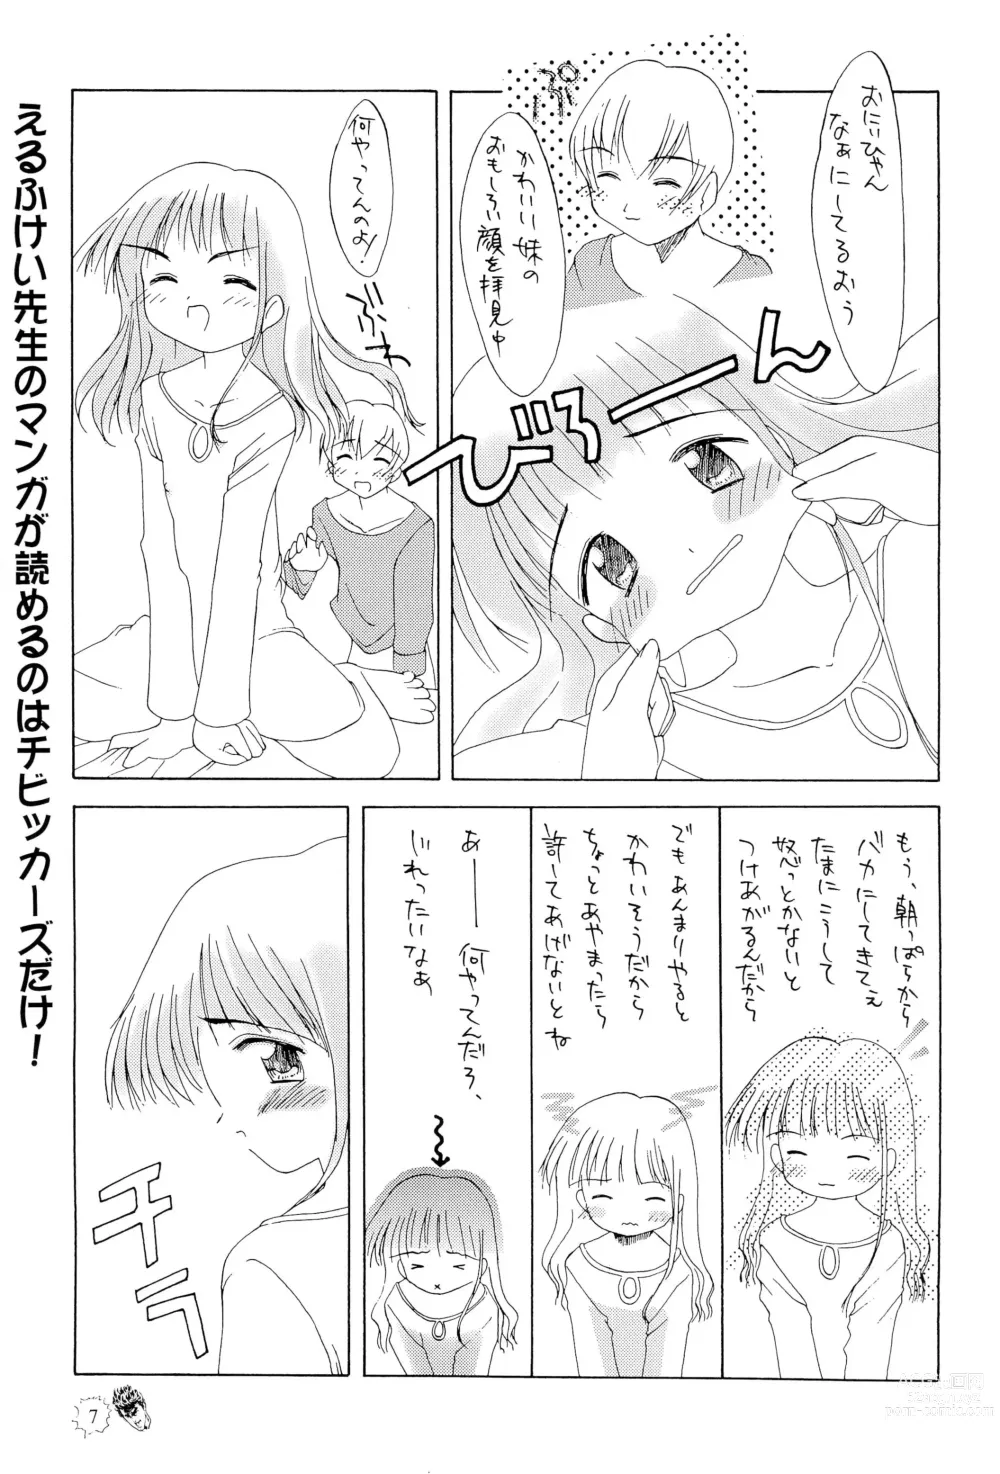 Page 7 of doujinshi CHIBICKERS 4